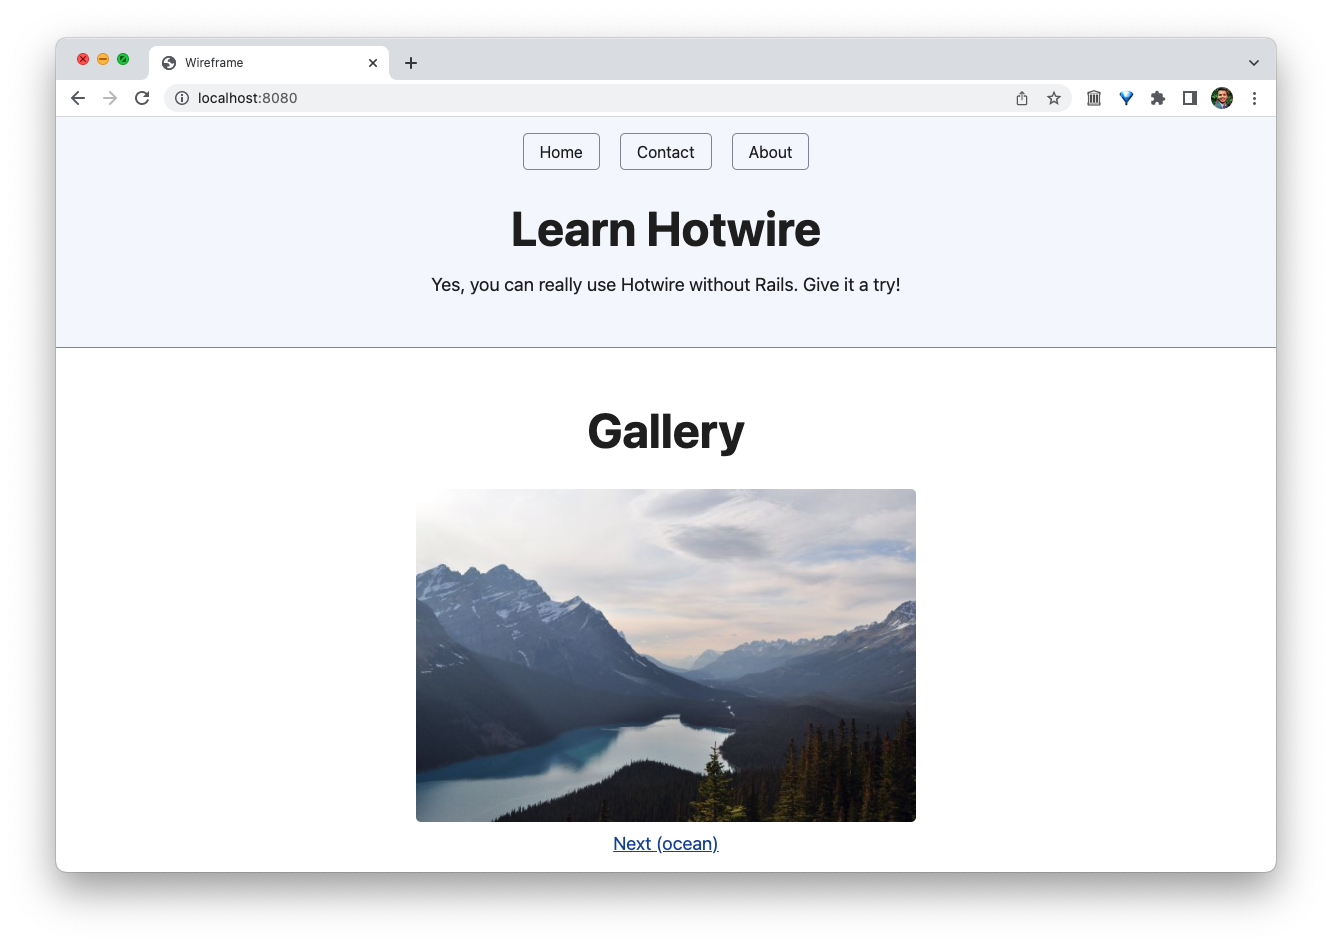 You don't need Rails to start using Hotwire